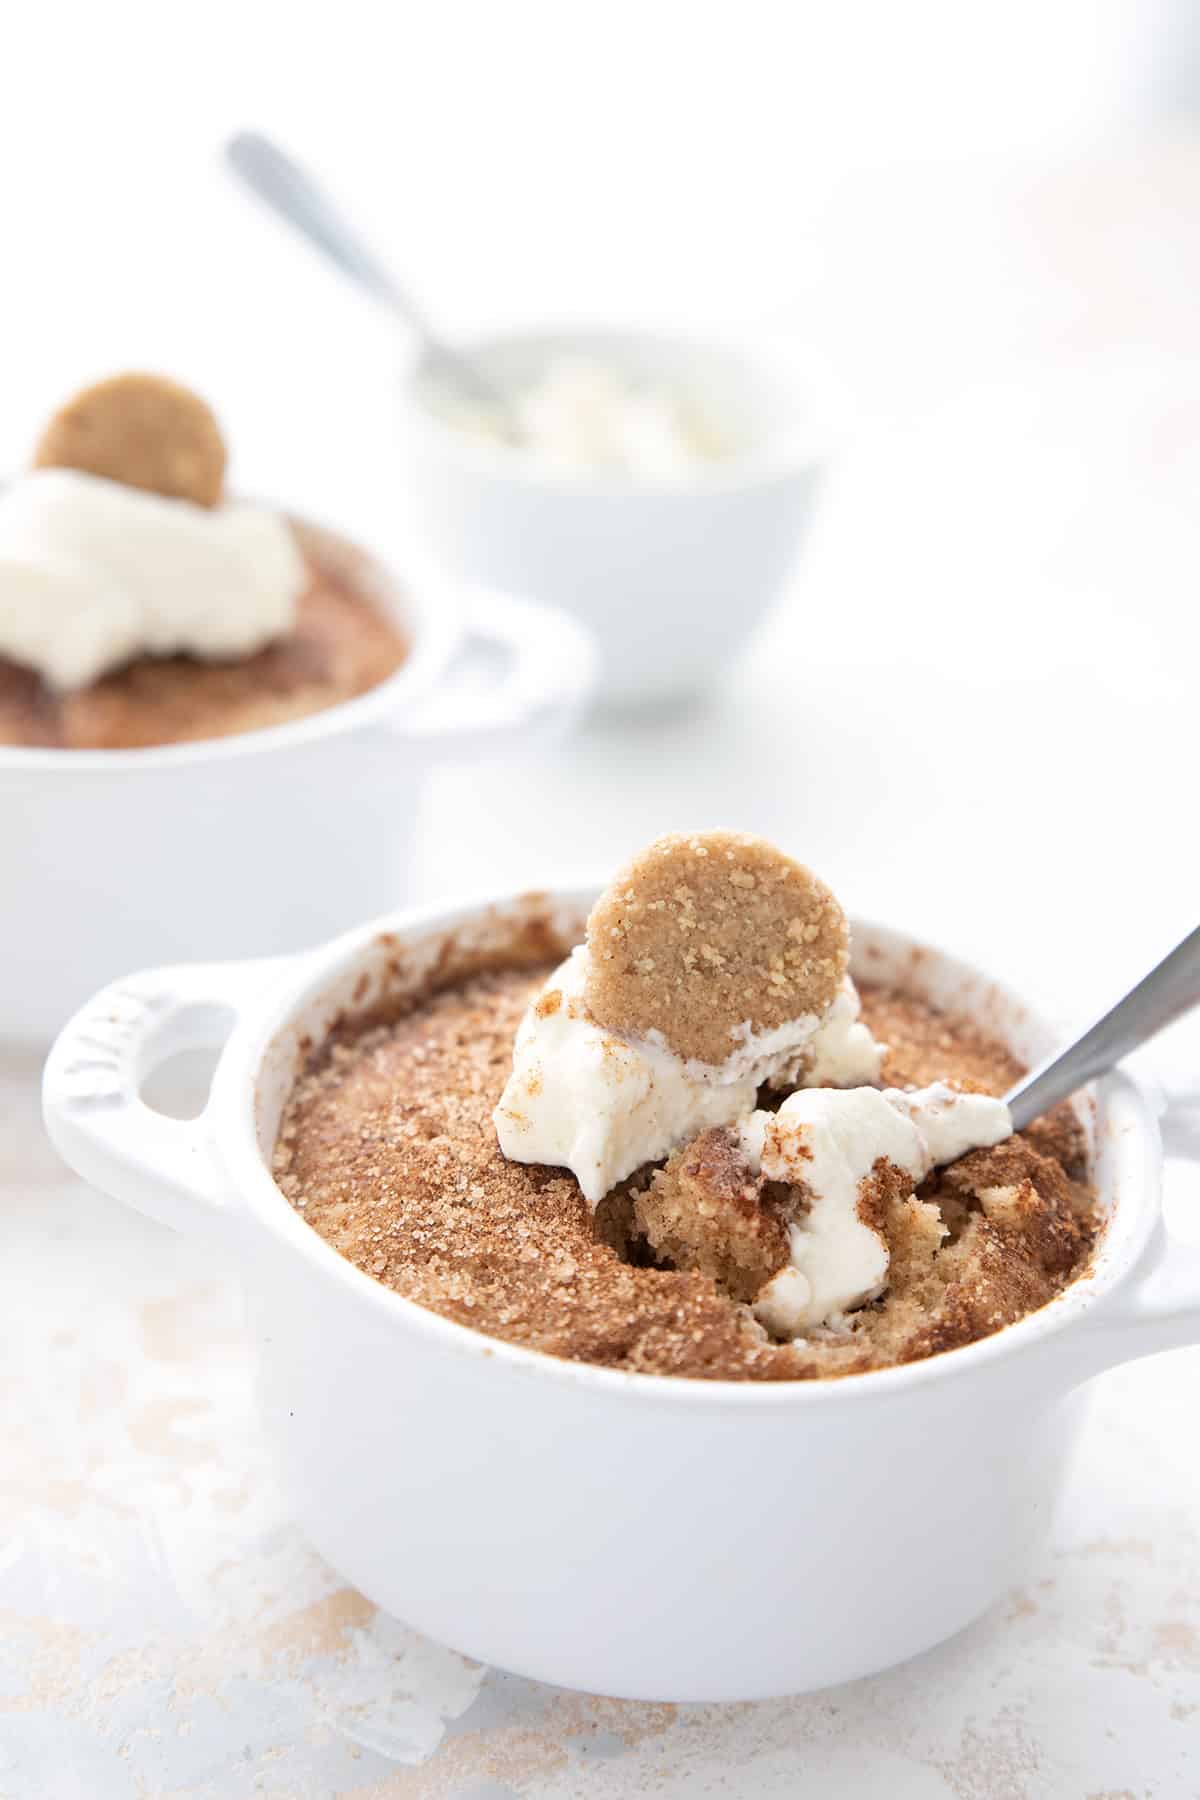 Keto mug cake in a white ramekin, with whipped cream and a mini snickerdoodle cookie on top.